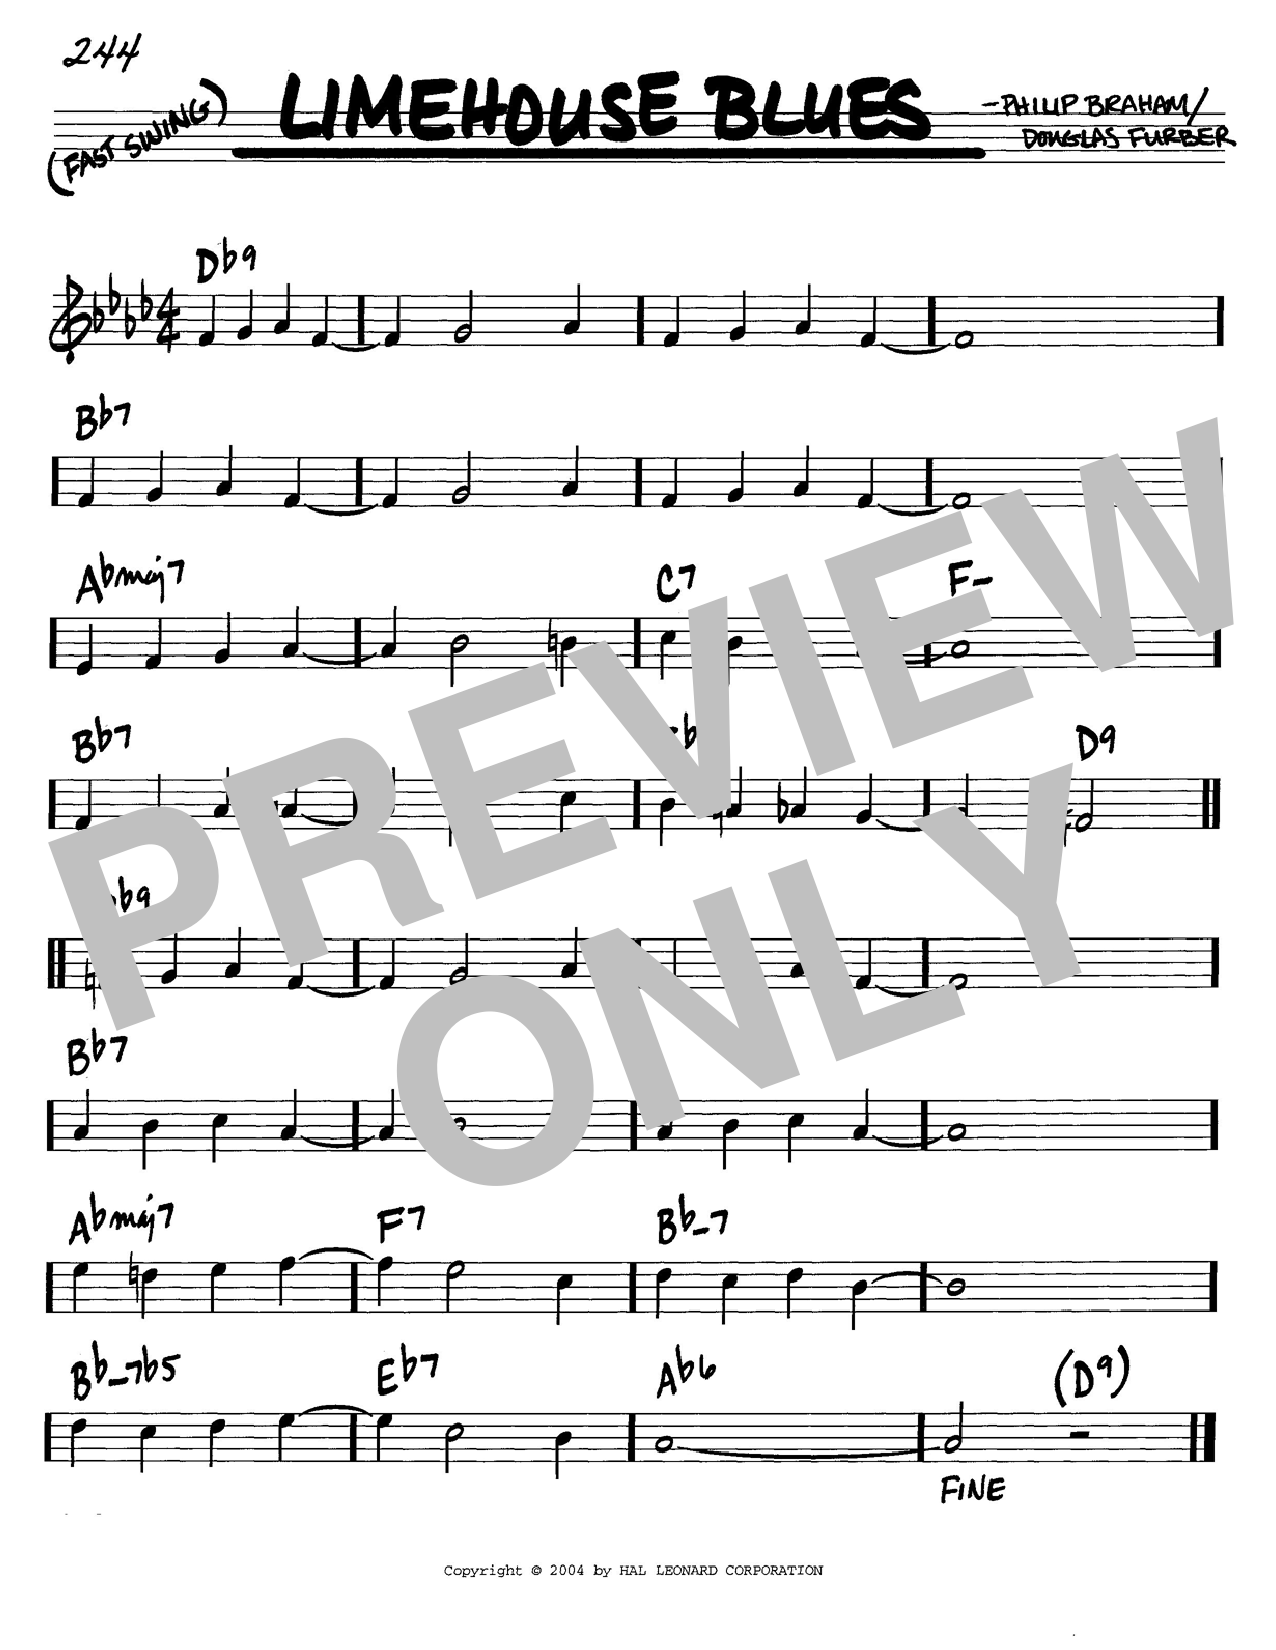 Douglas Furber Limehouse Blues sheet music notes and chords. Download Printable PDF.